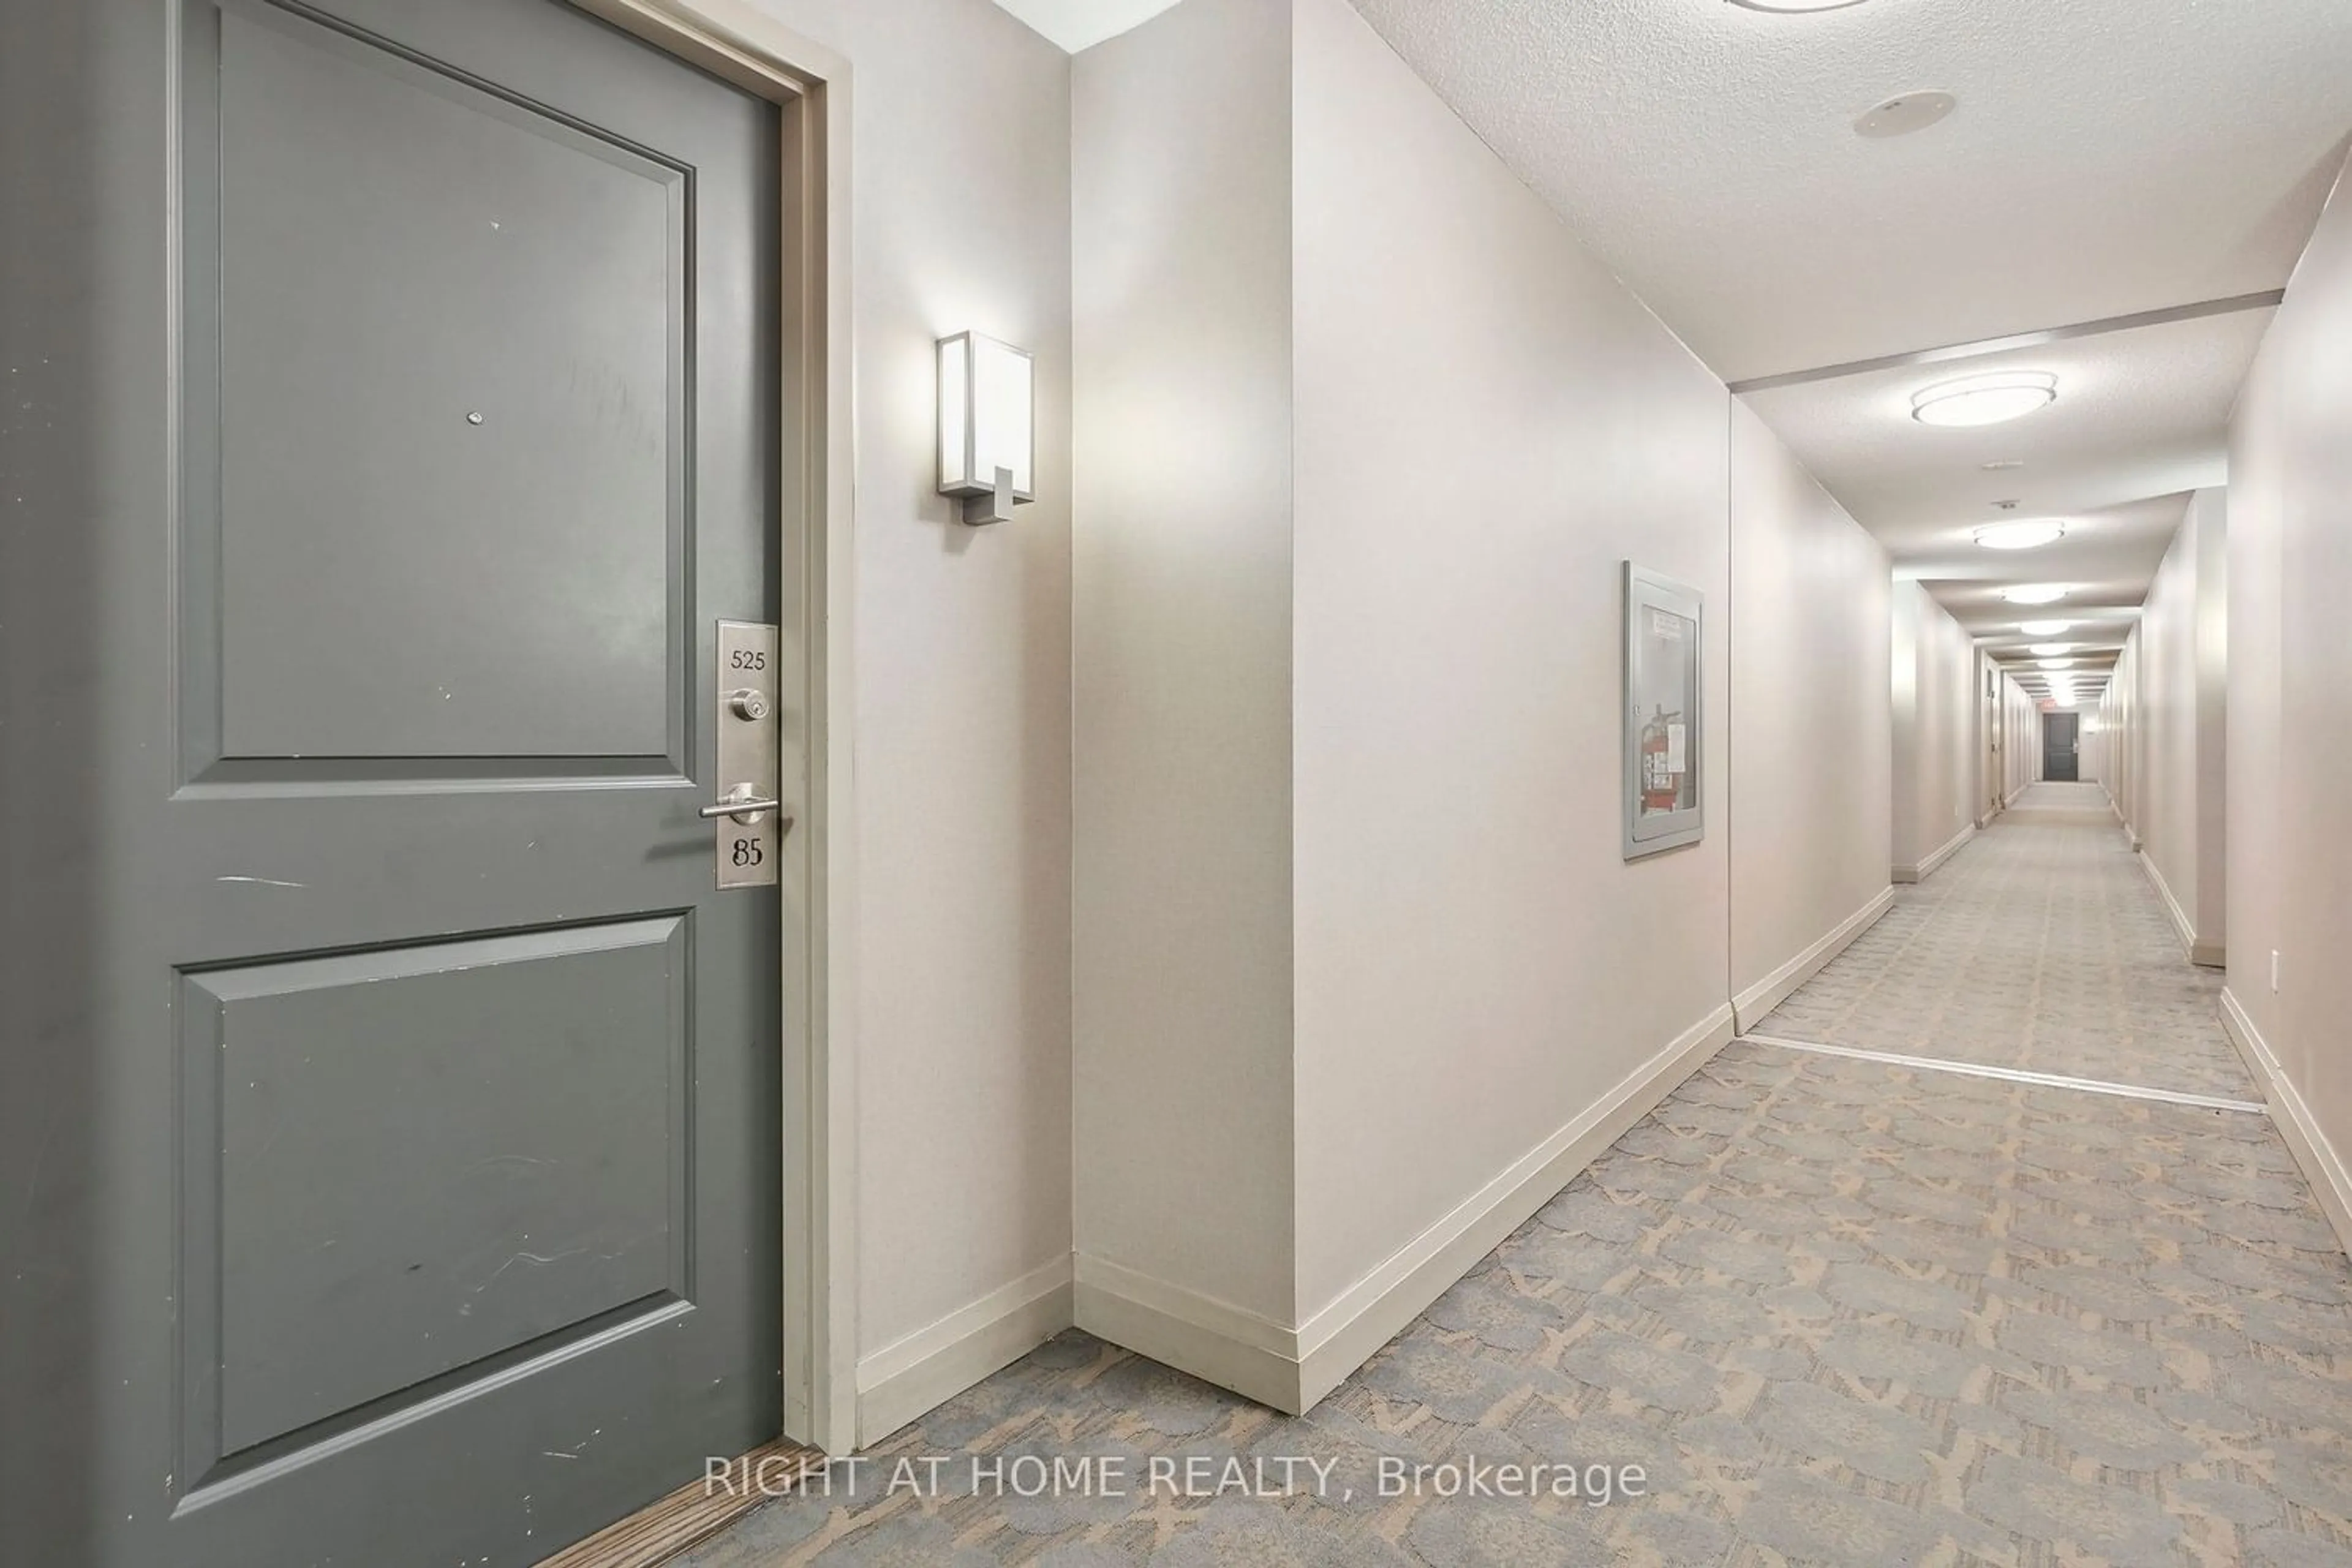 Indoor foyer for 85 East Liberty St #525, Toronto Ontario M6K 3R4